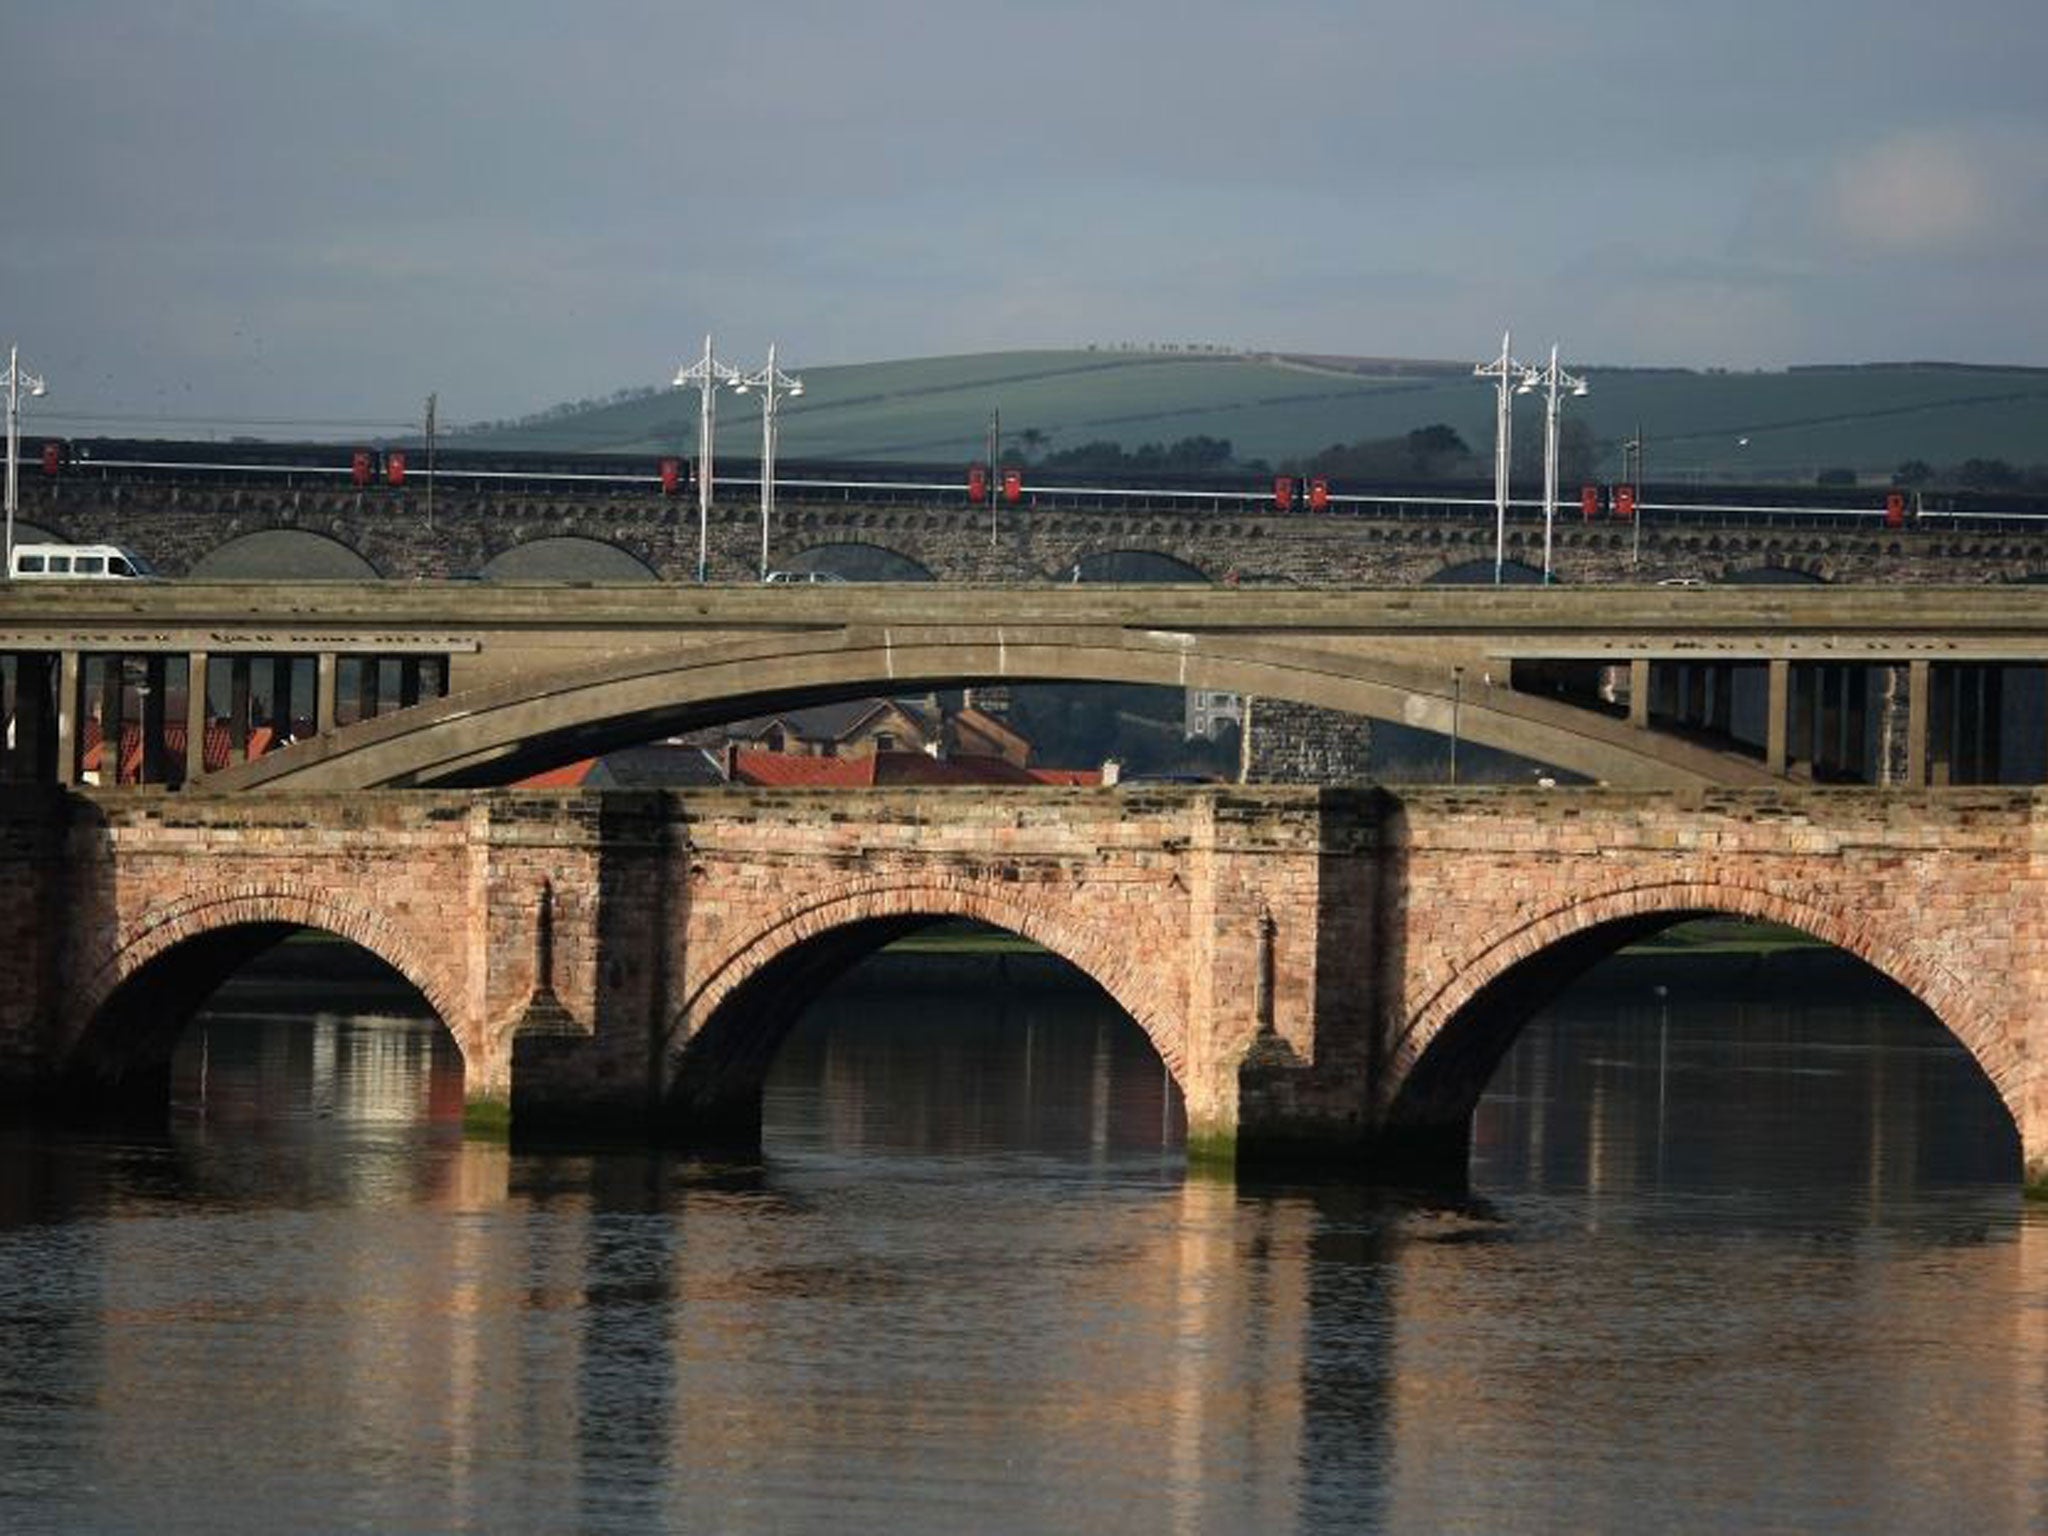 The SNP want to cut off the benefits symbolised by Berwick Bridge